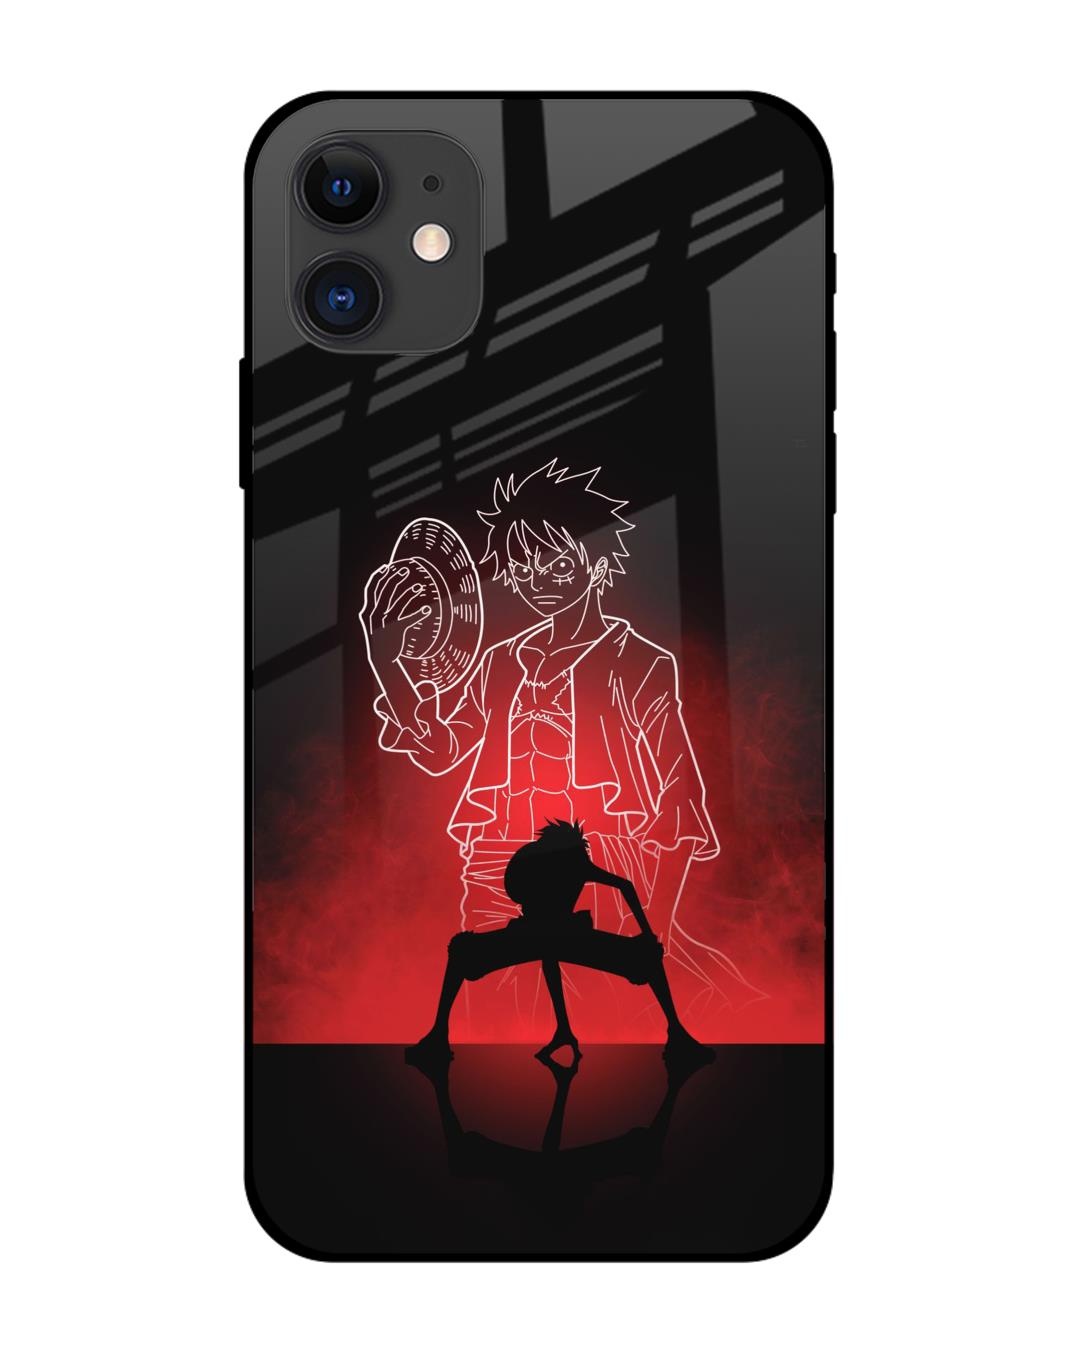 Anime Naruto Aesthetic Metal Back Case for iPhone 12 Pro  Mobile Phone  Covers  Cases in India Online at CoversCartcom